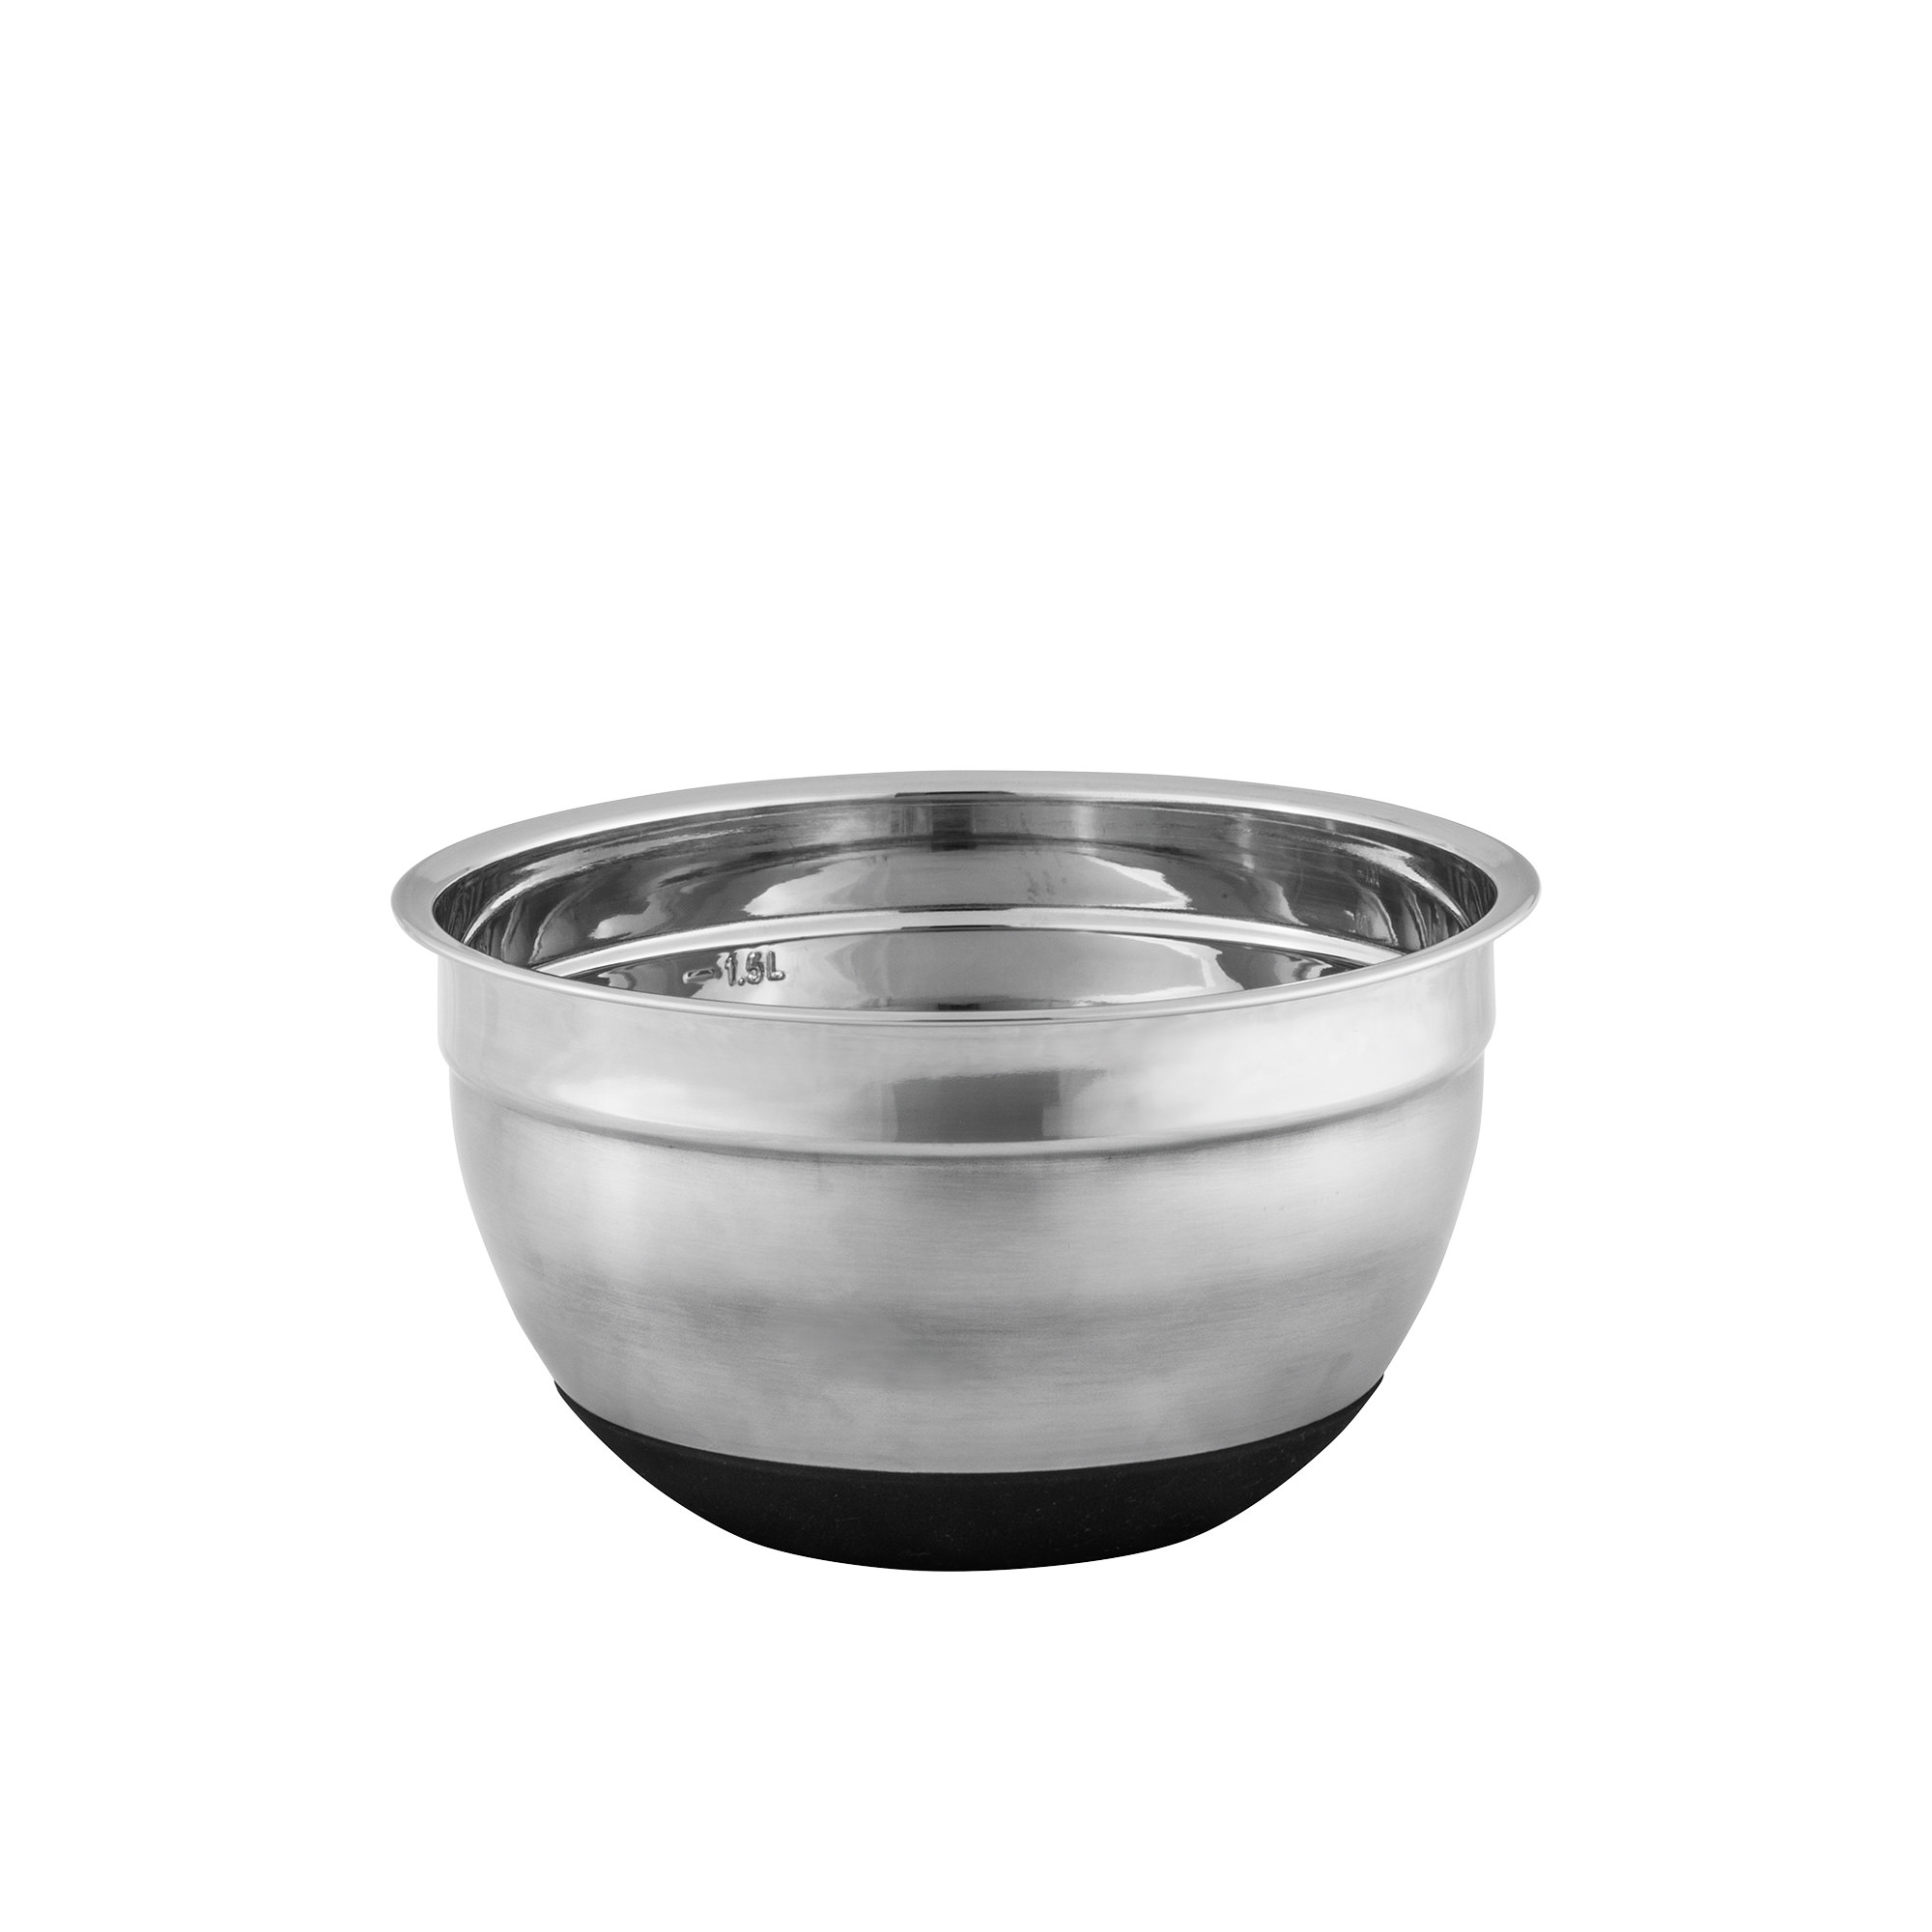 Avanti Stainless Steel Mixing Bowl with Silicone Bottom 18cm - 1.5L Image 1